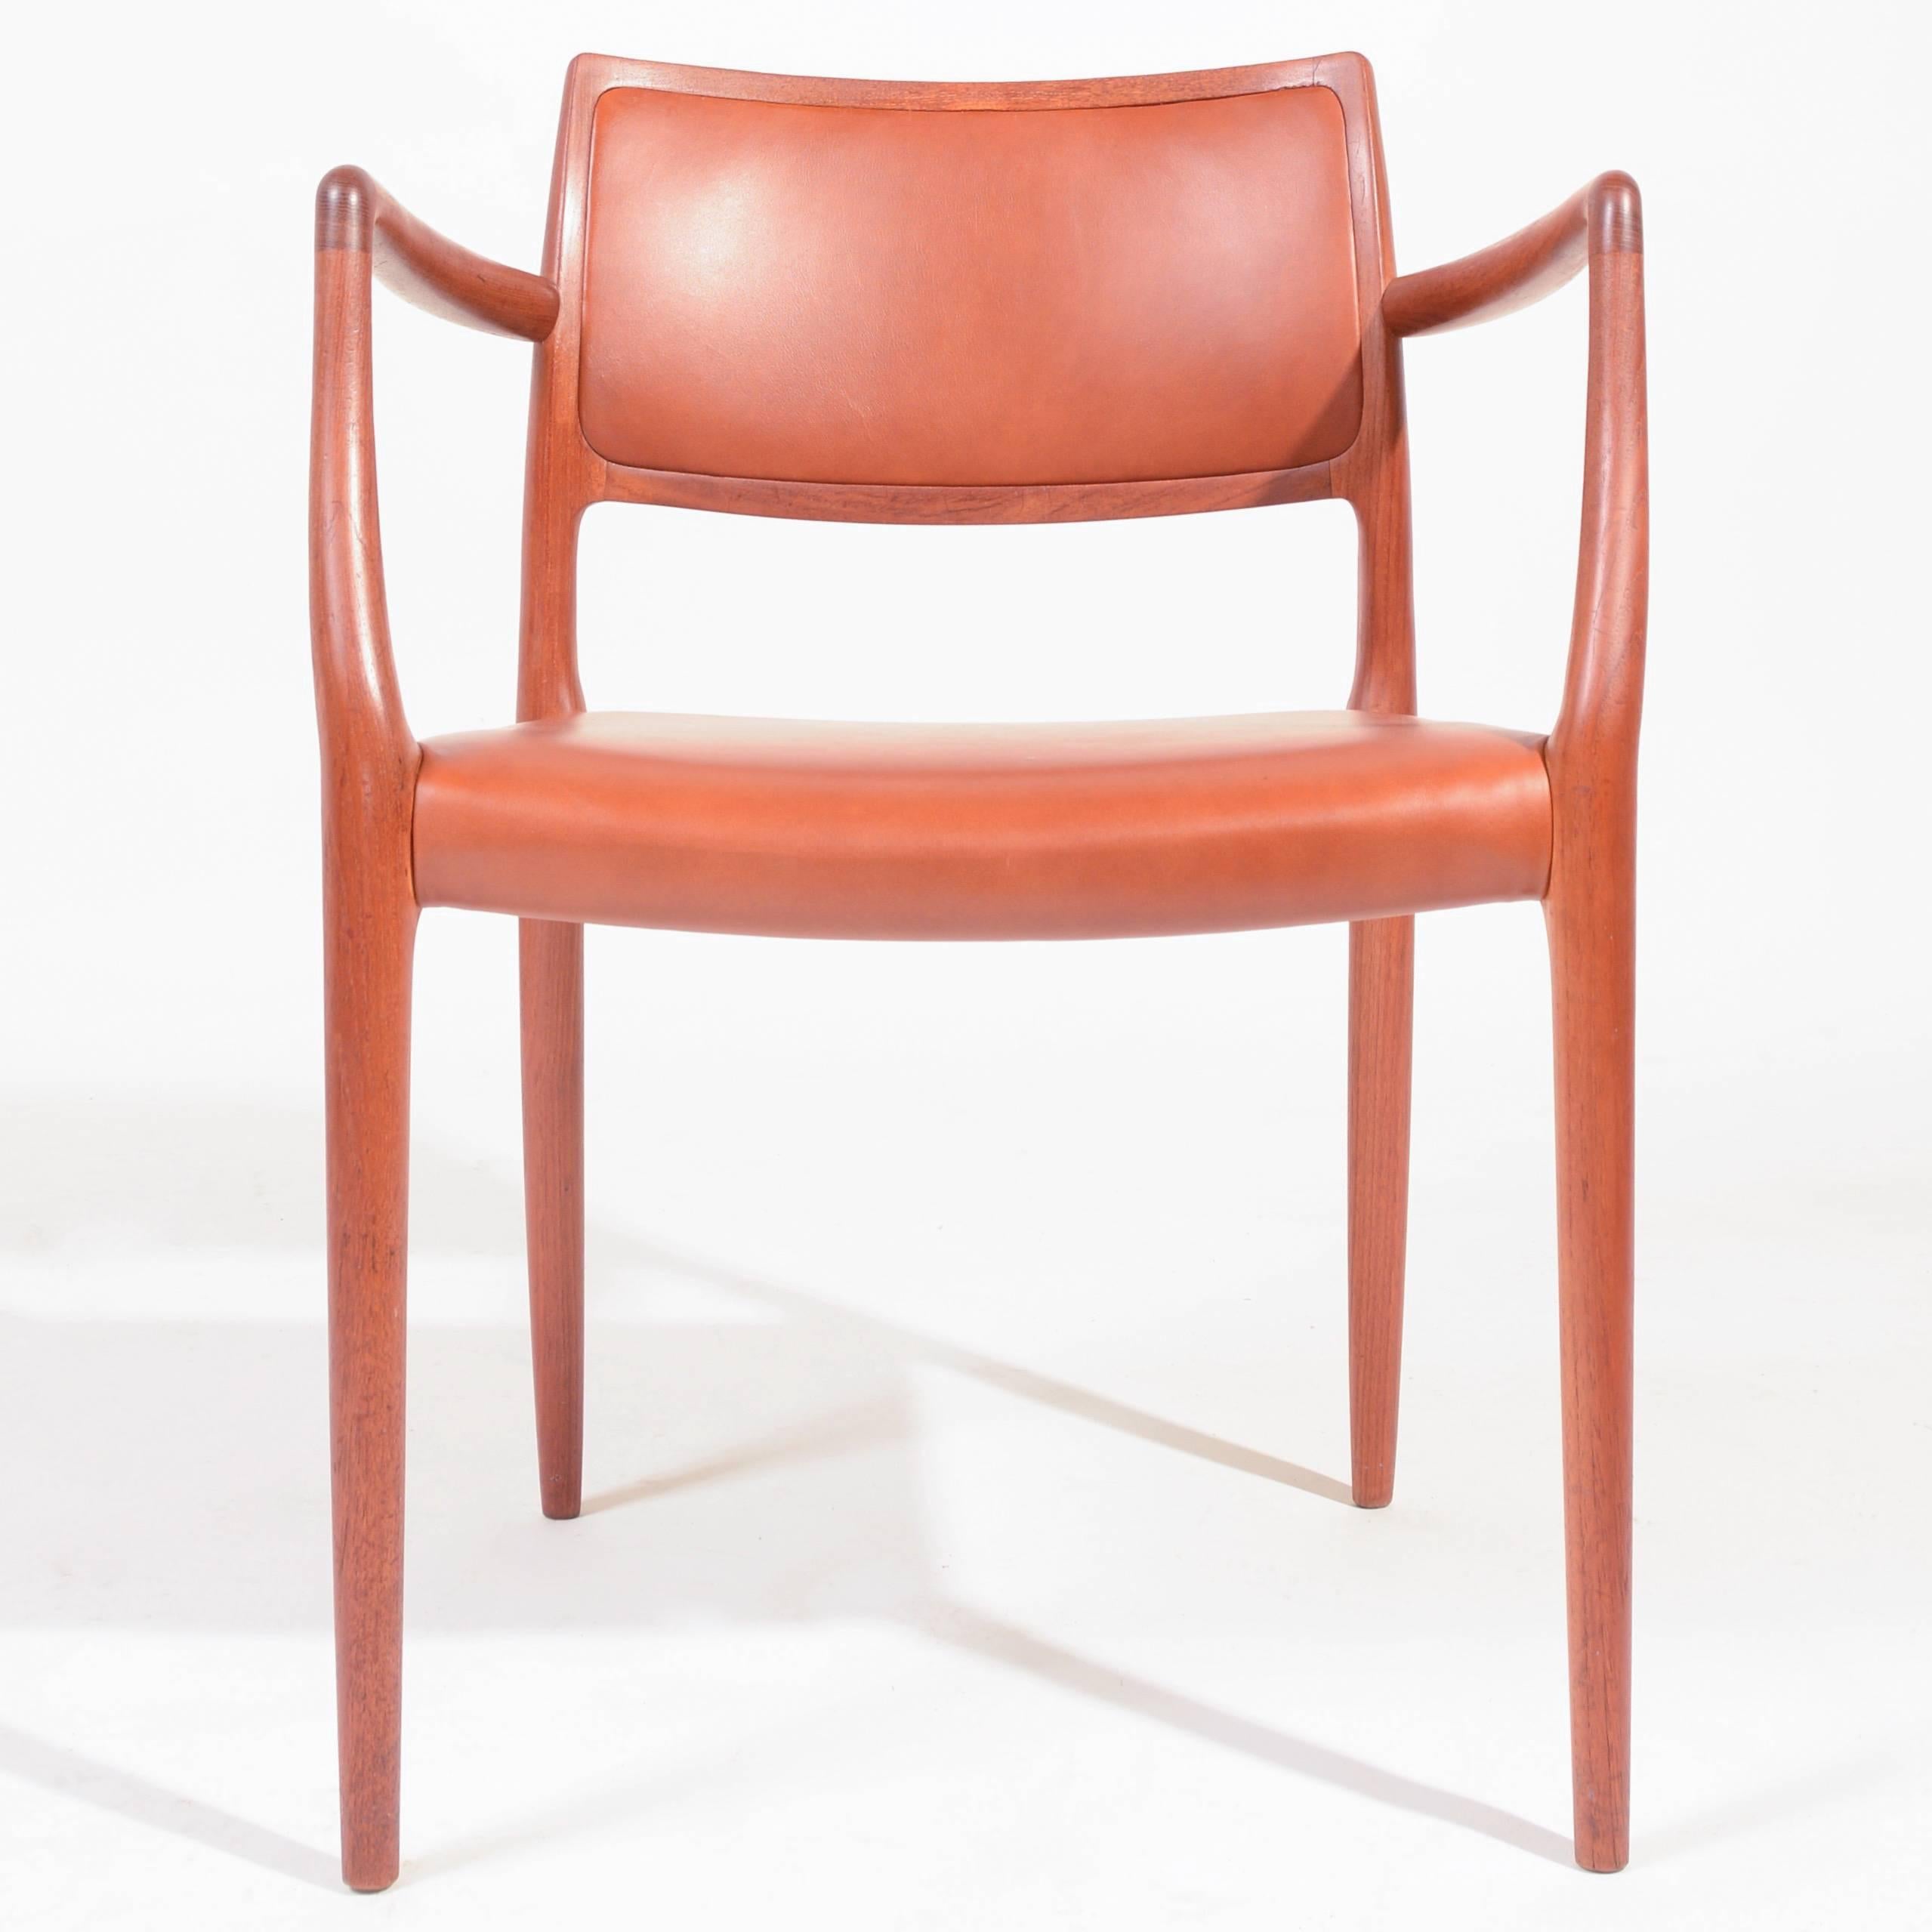 Pair of two teak dining chairs designed by Niels Otto Møller for J. L. Møllers Møbelfabrik. The model 80 dates to 1968 and is an exceptional chair offering a very comfortable posture and the warm modern look typical of great Danish design. Newly